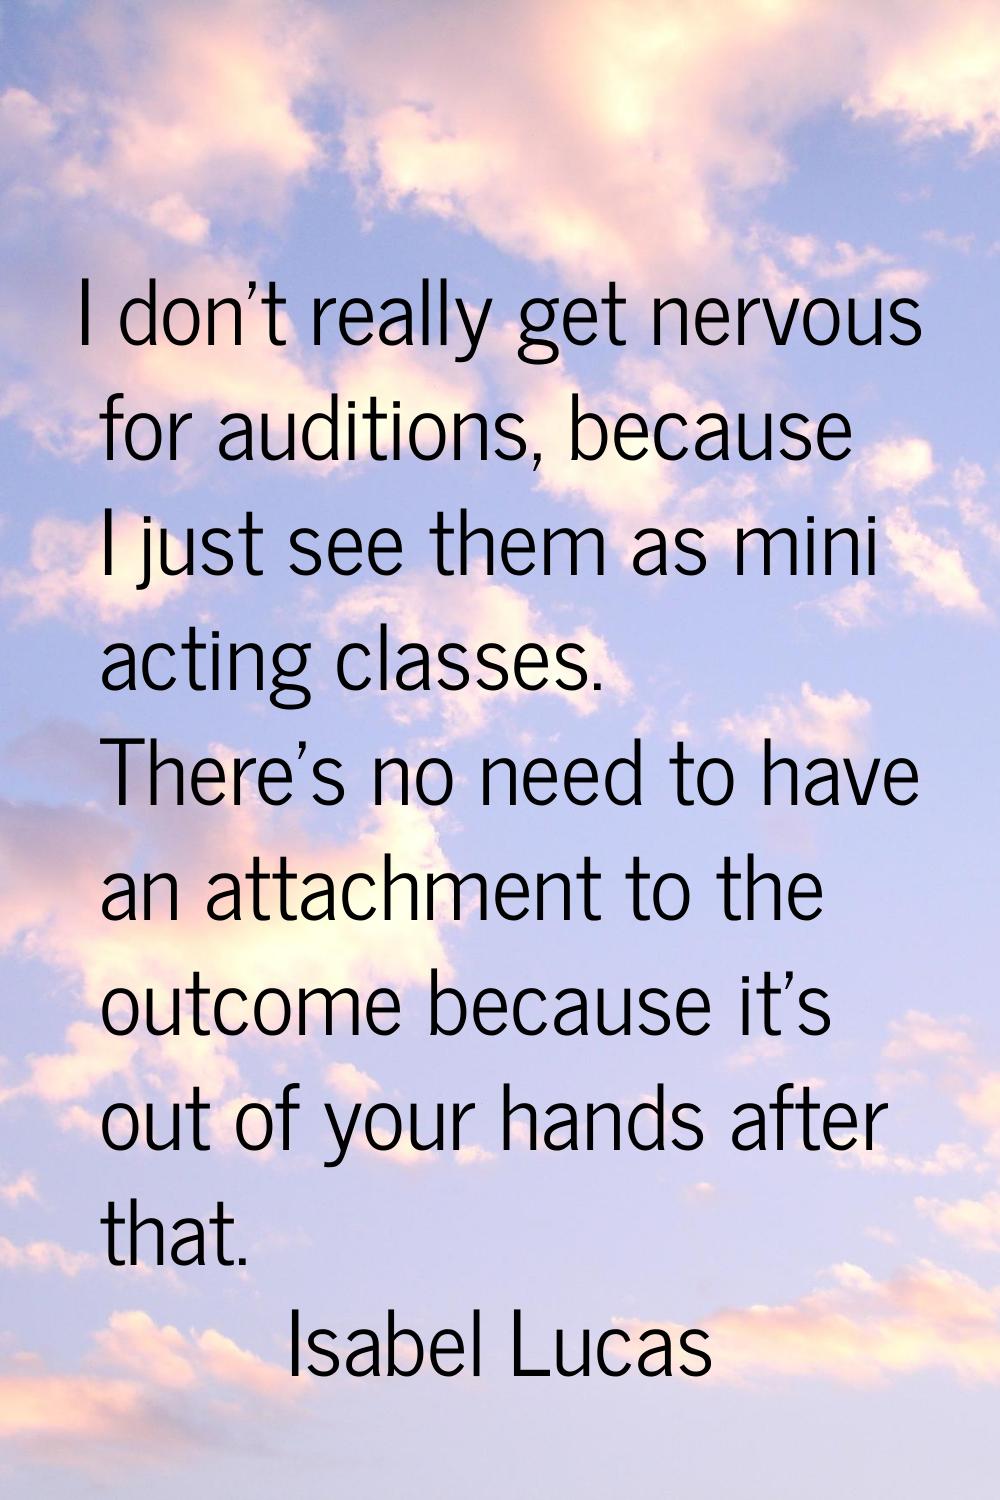 I don't really get nervous for auditions, because I just see them as mini acting classes. There's n